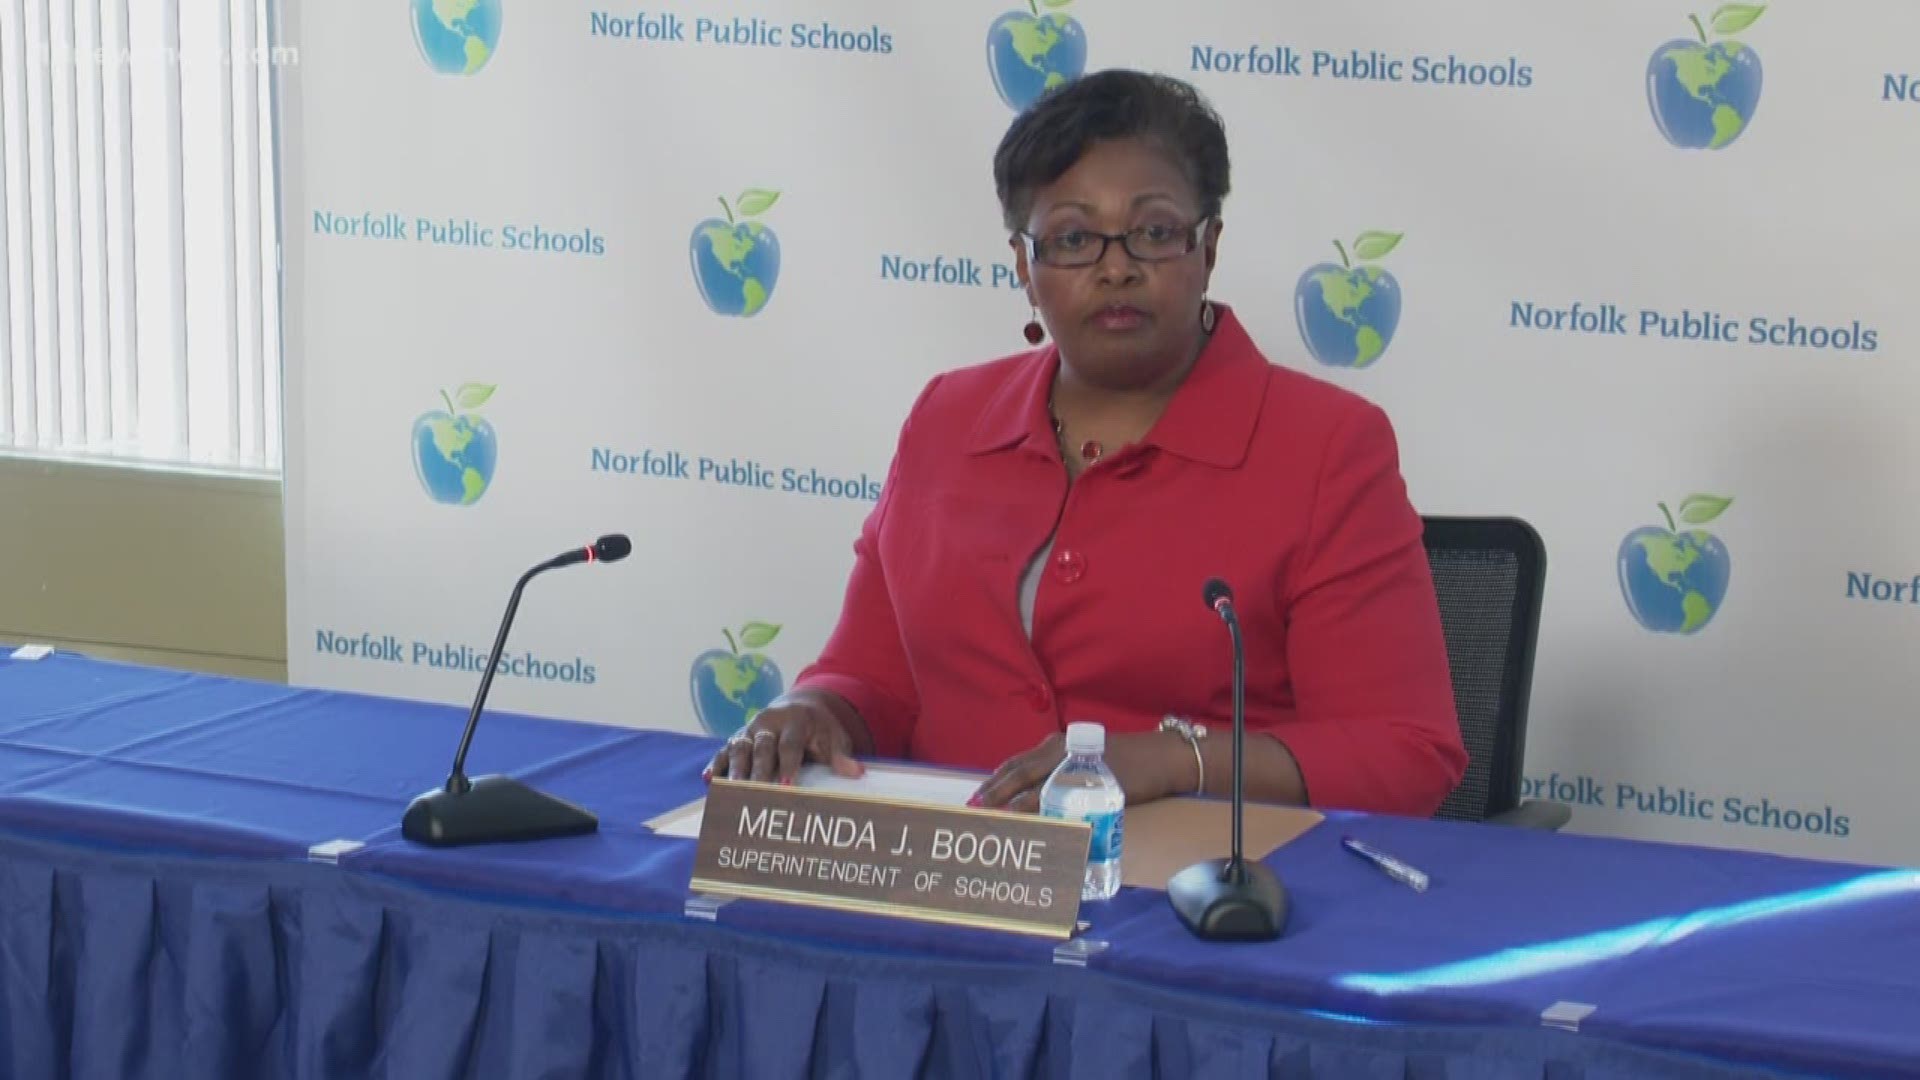 Norfolk's School Board is expected to hold a special closed-door meeting, just days after the school district's superintendent stepped down. The meeting's agenda, posted online, shows the board will discuss personnel matters privately.